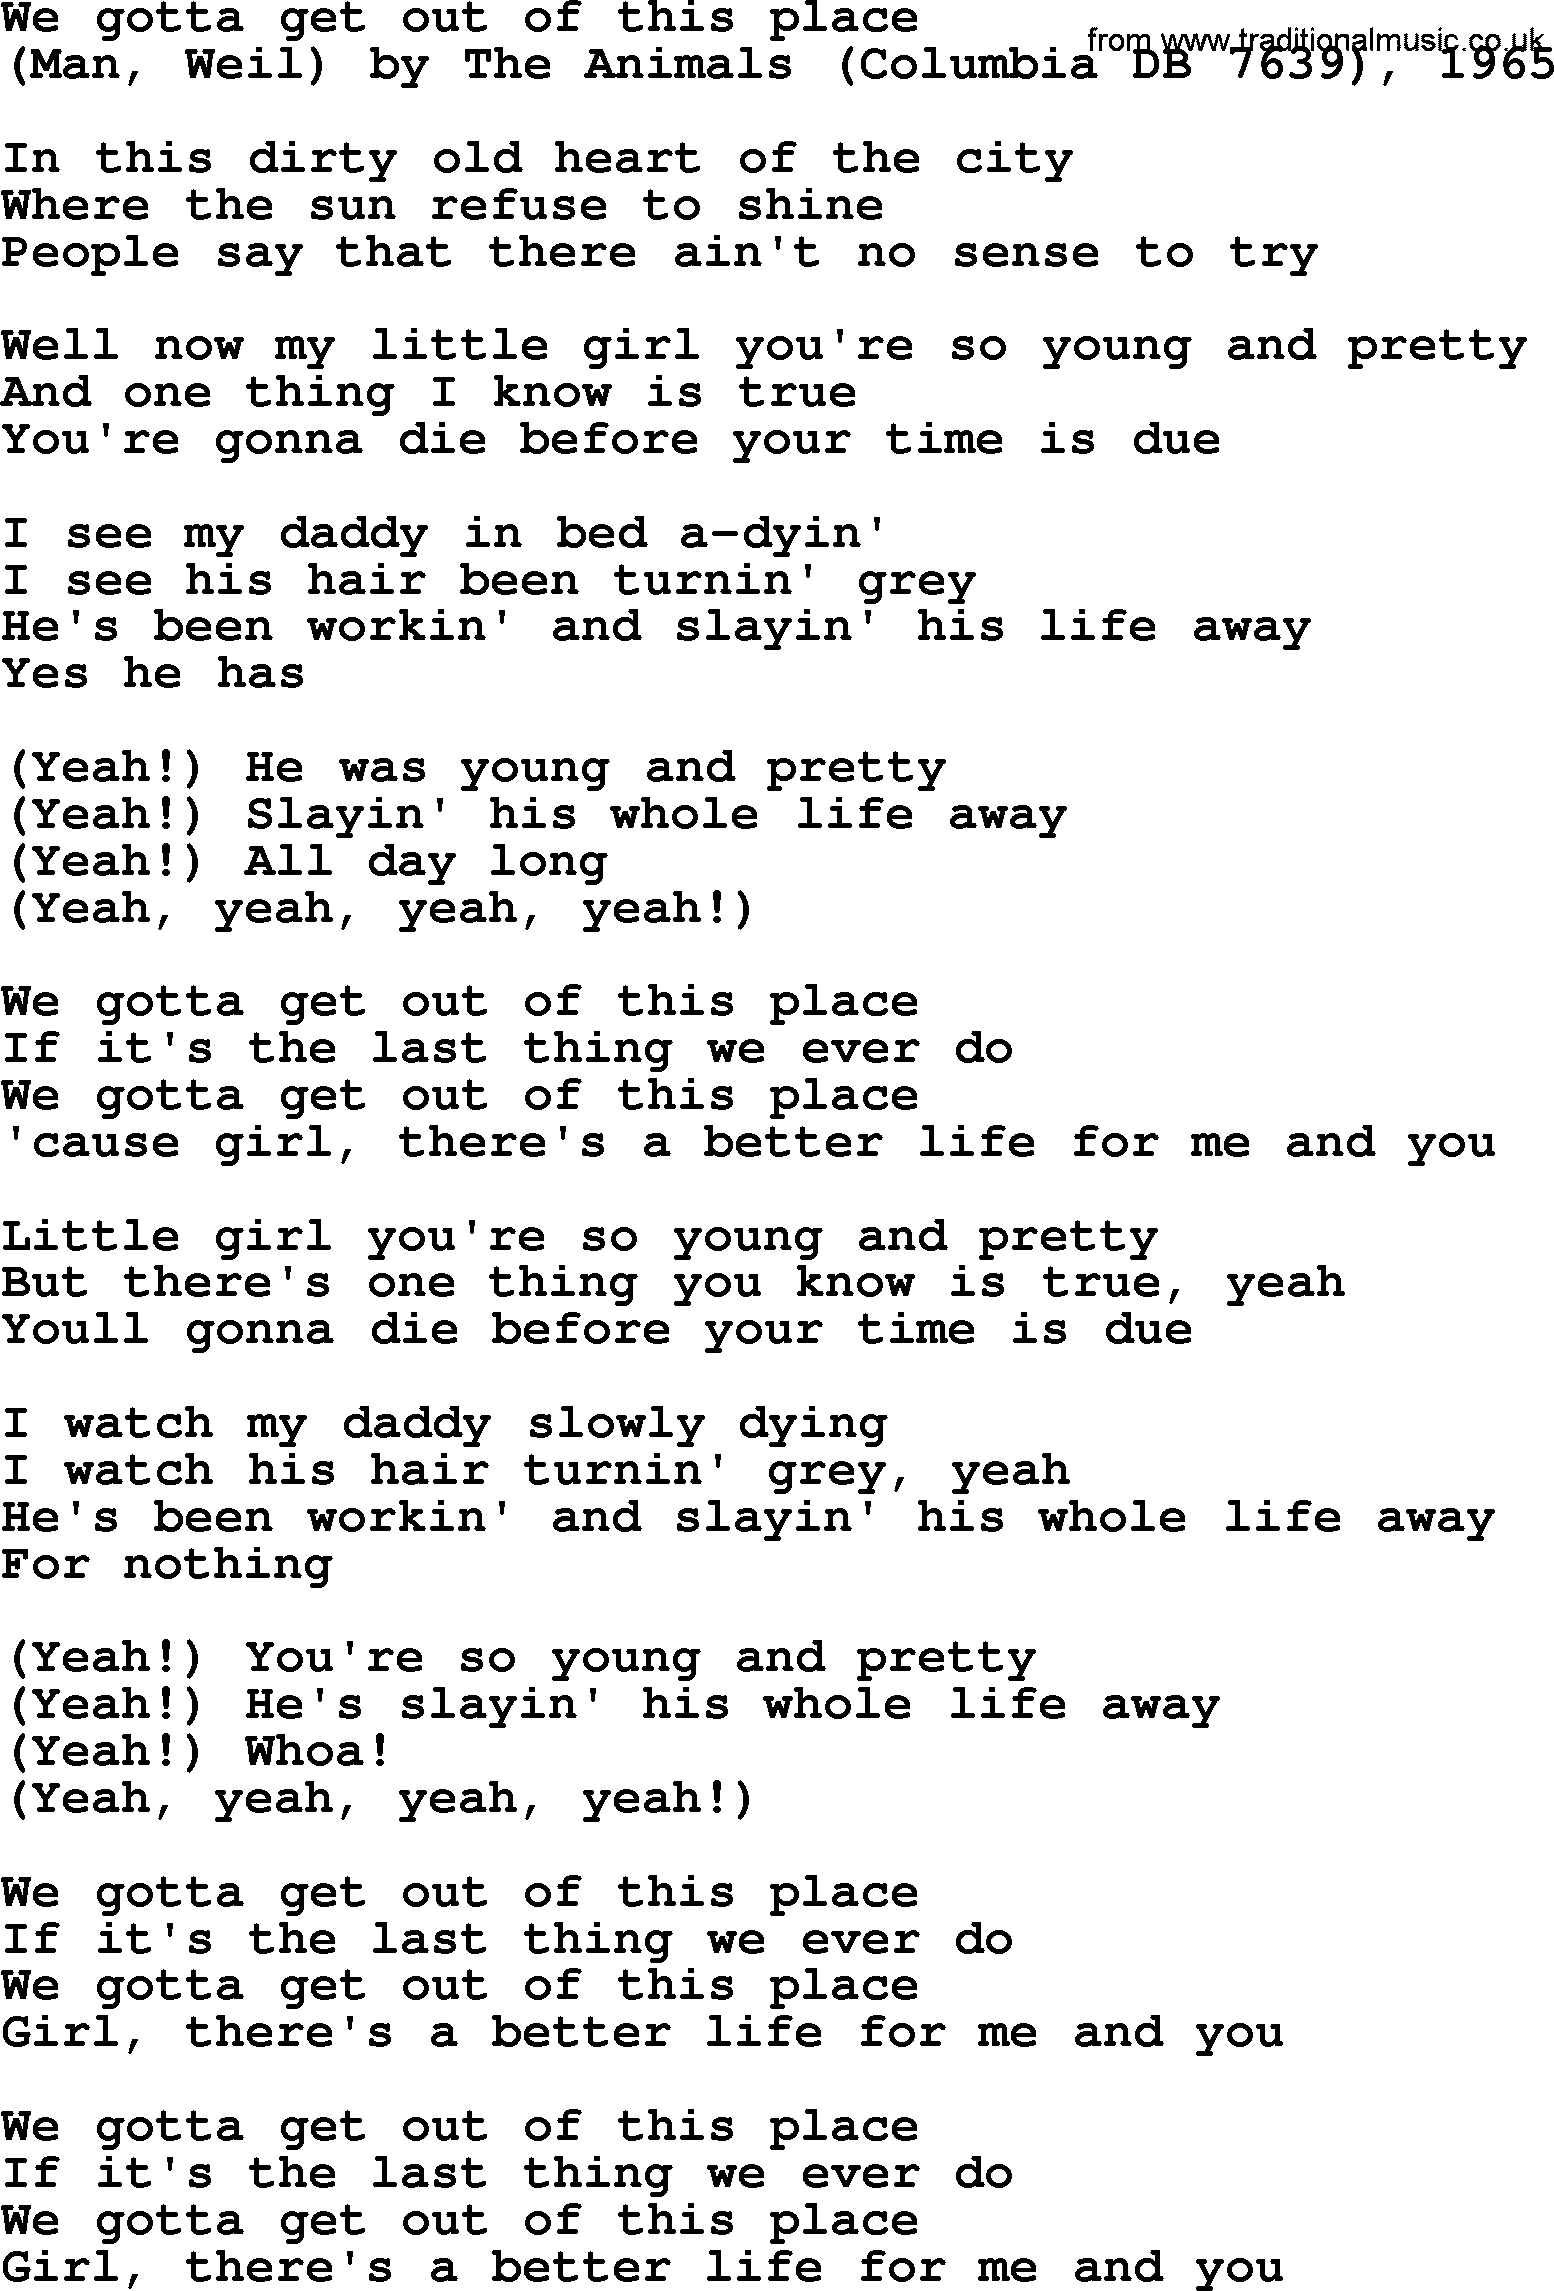 Bruce Springsteen song: We Gotta Get Out Of This Place lyrics